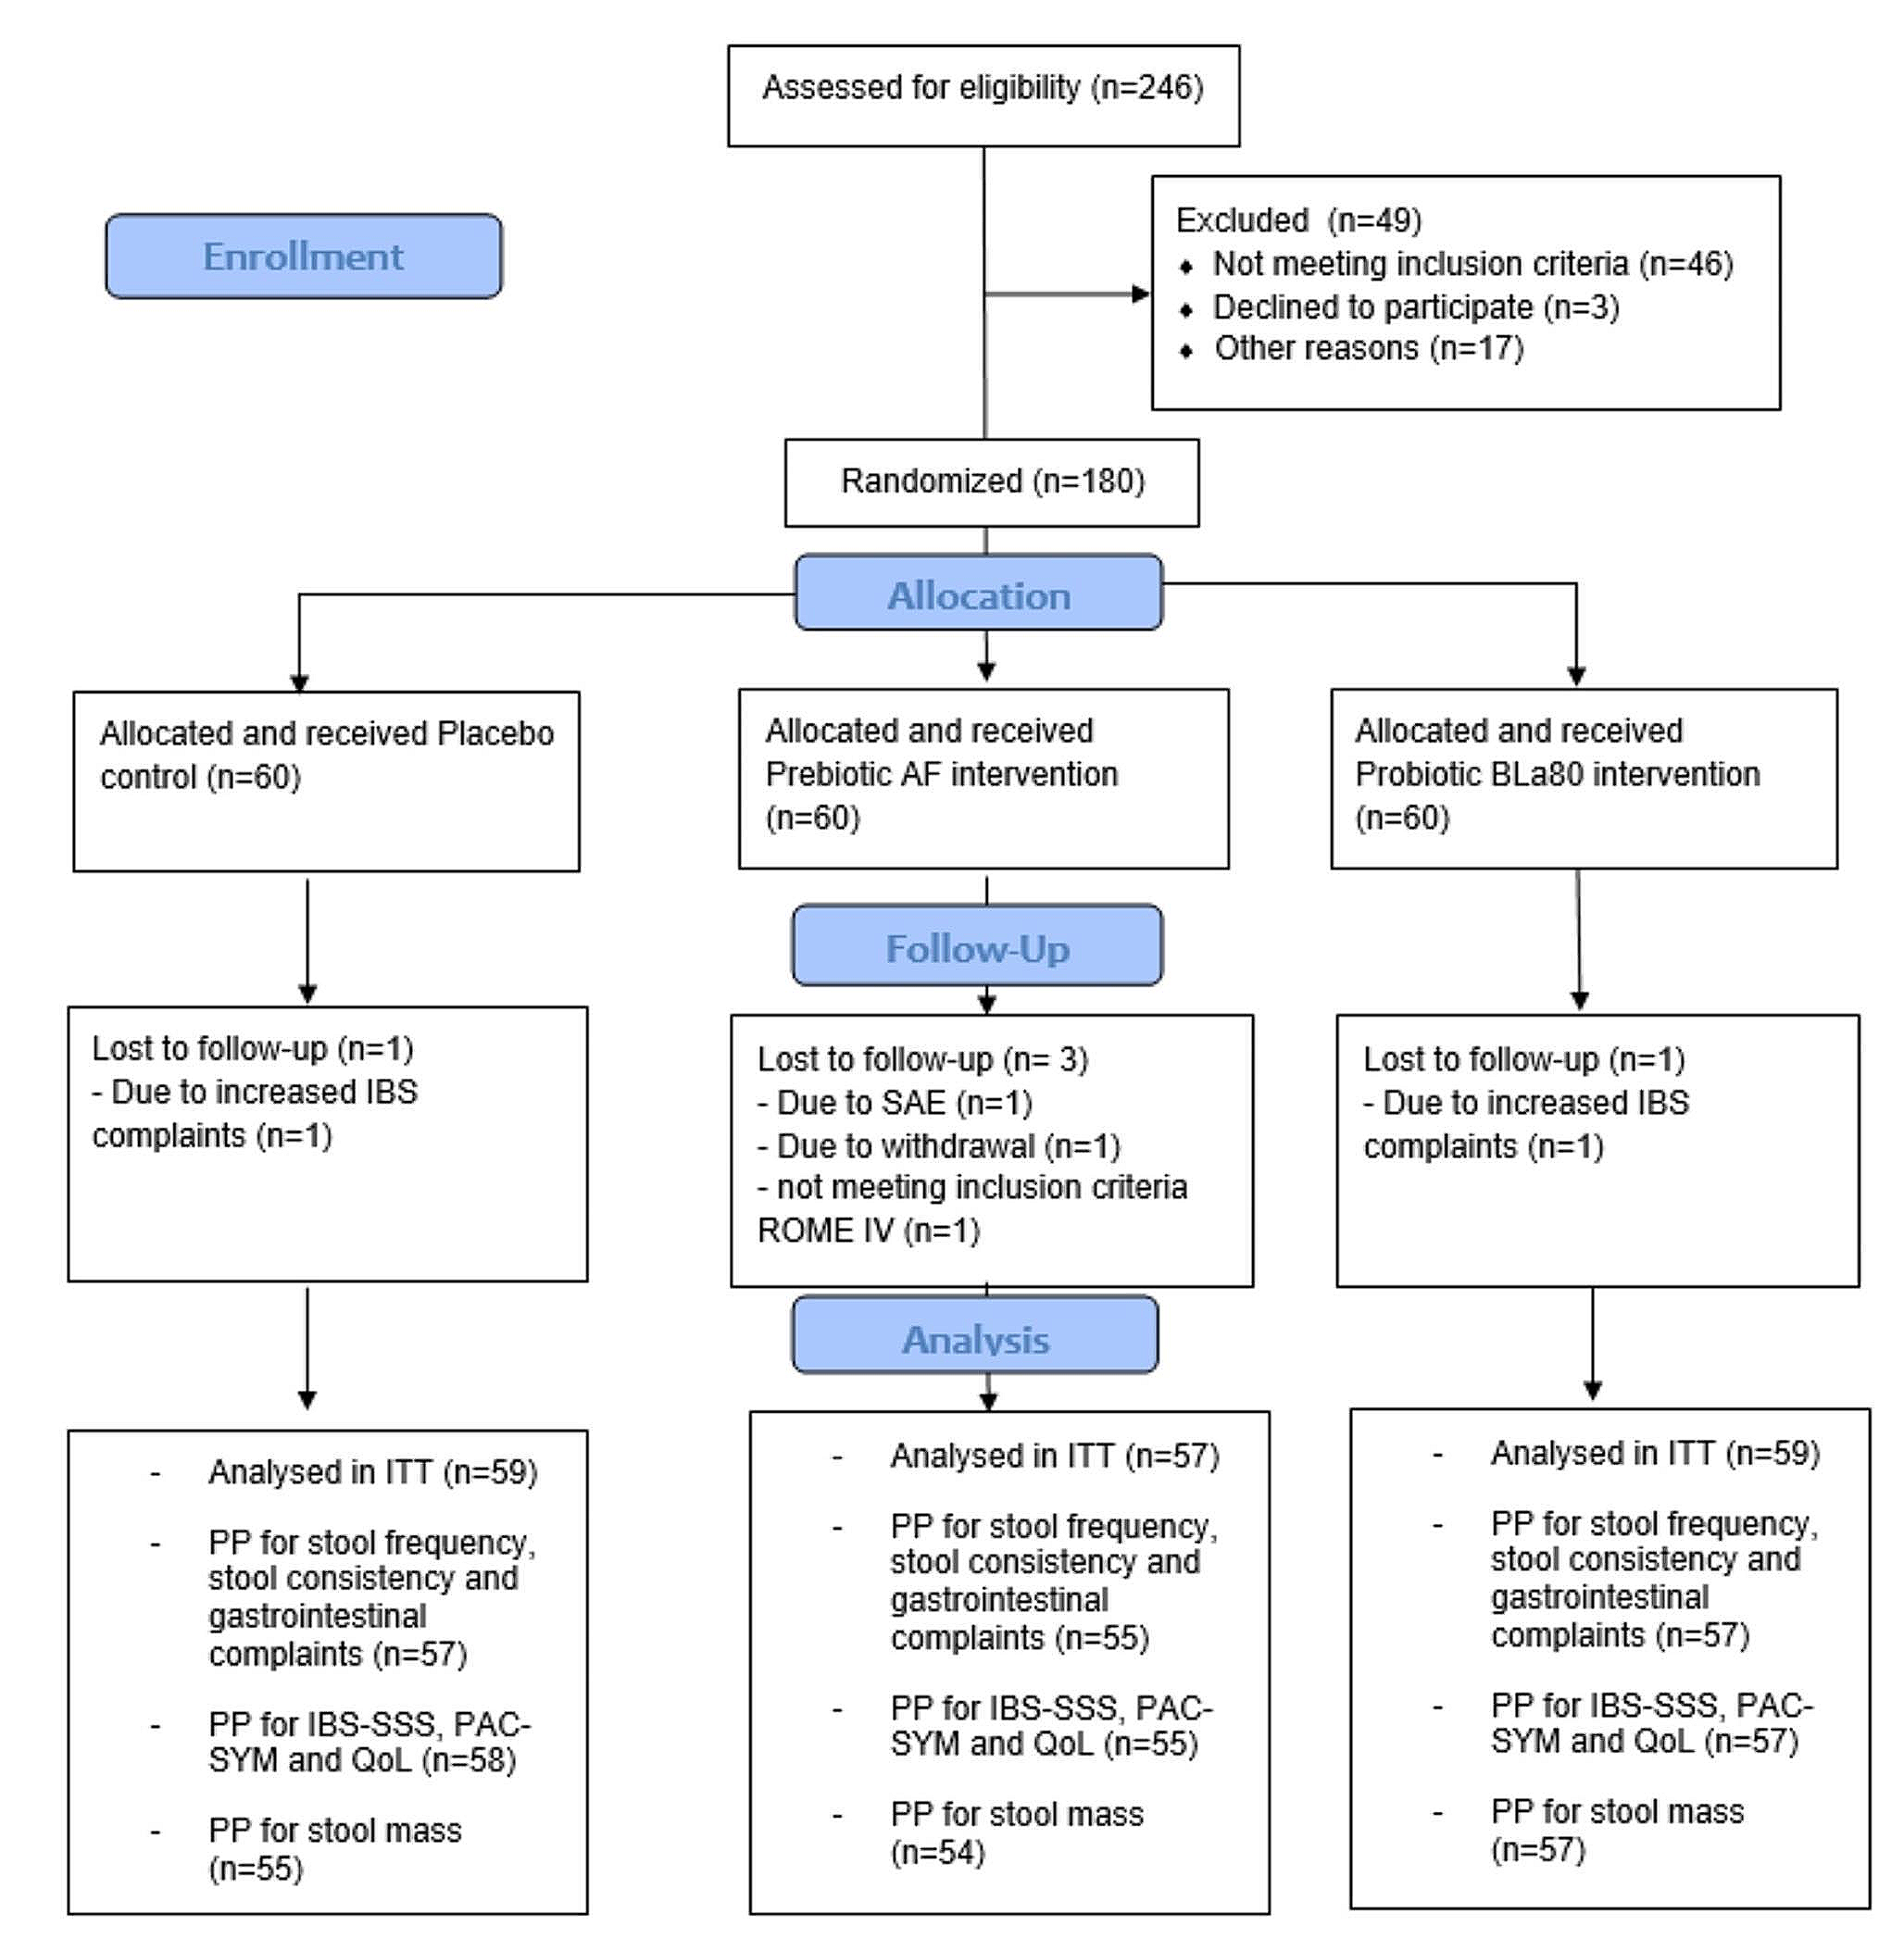 Acacia fiber or probiotic supplements to relieve gastrointestinal complaints in patients with constipation-predominant IBS: a 4-week randomized double-blinded placebo-controlled intervention trial